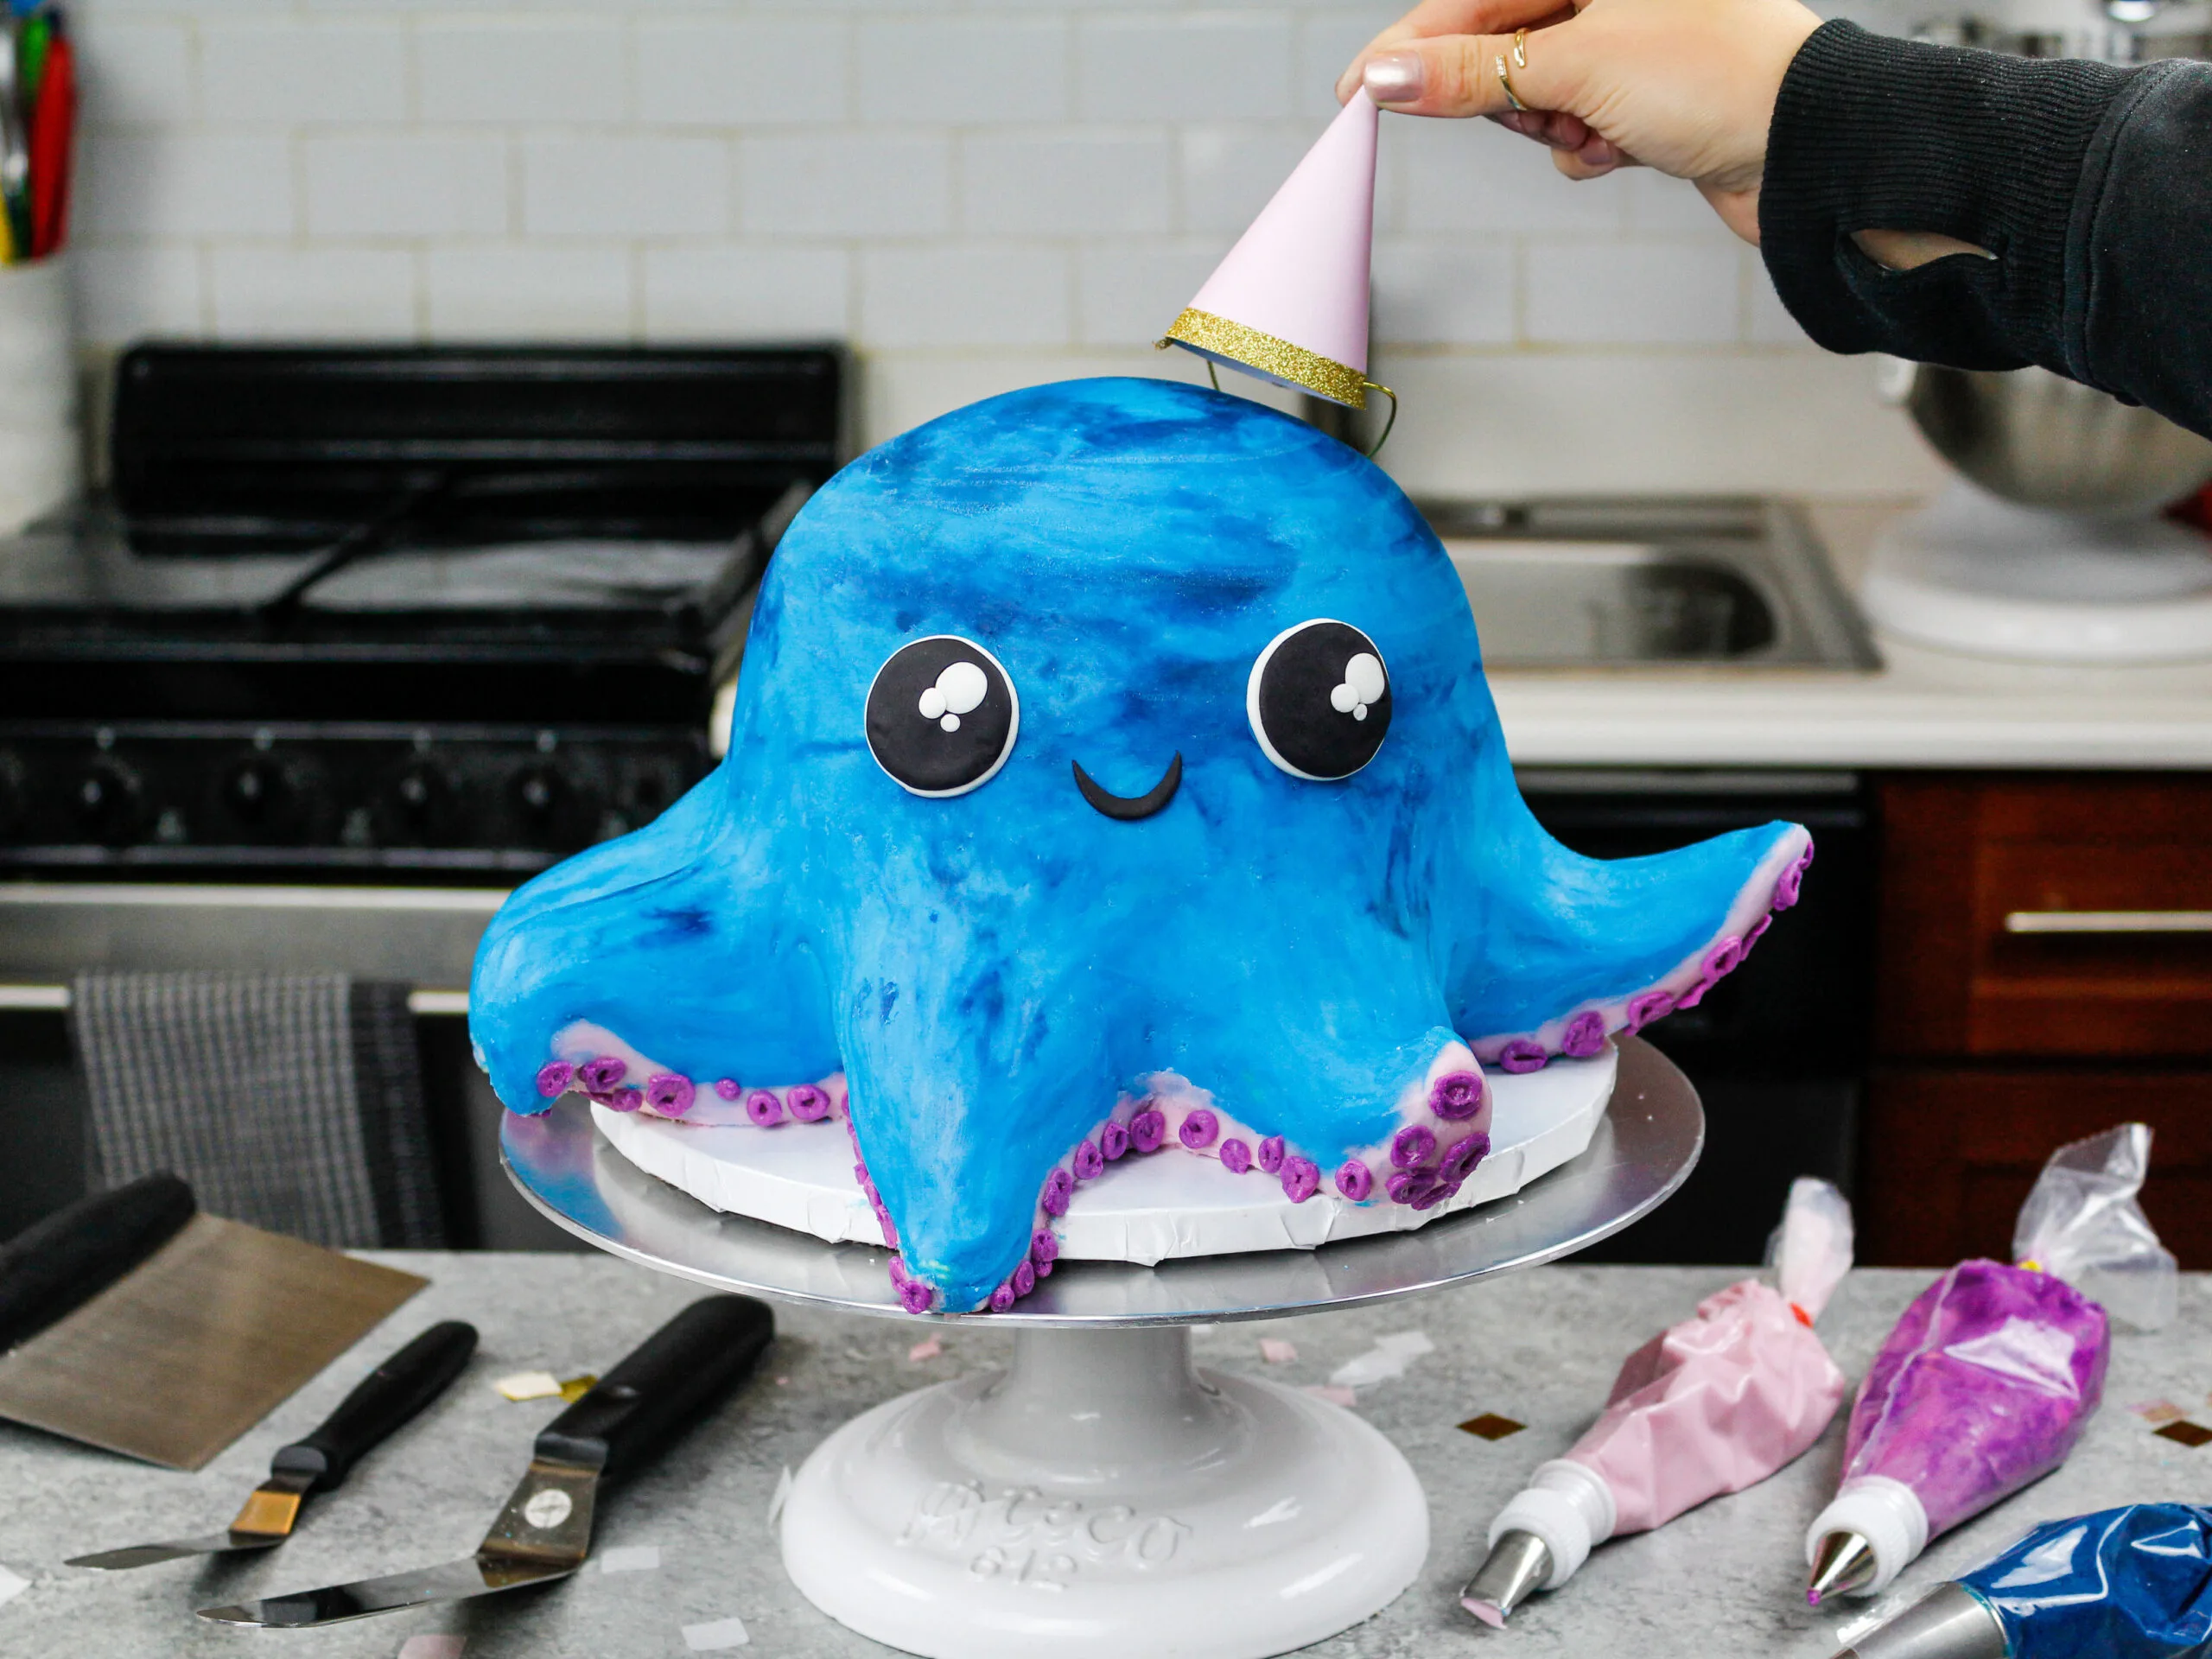 image of an octopus cake made for a birthday party with a party hat